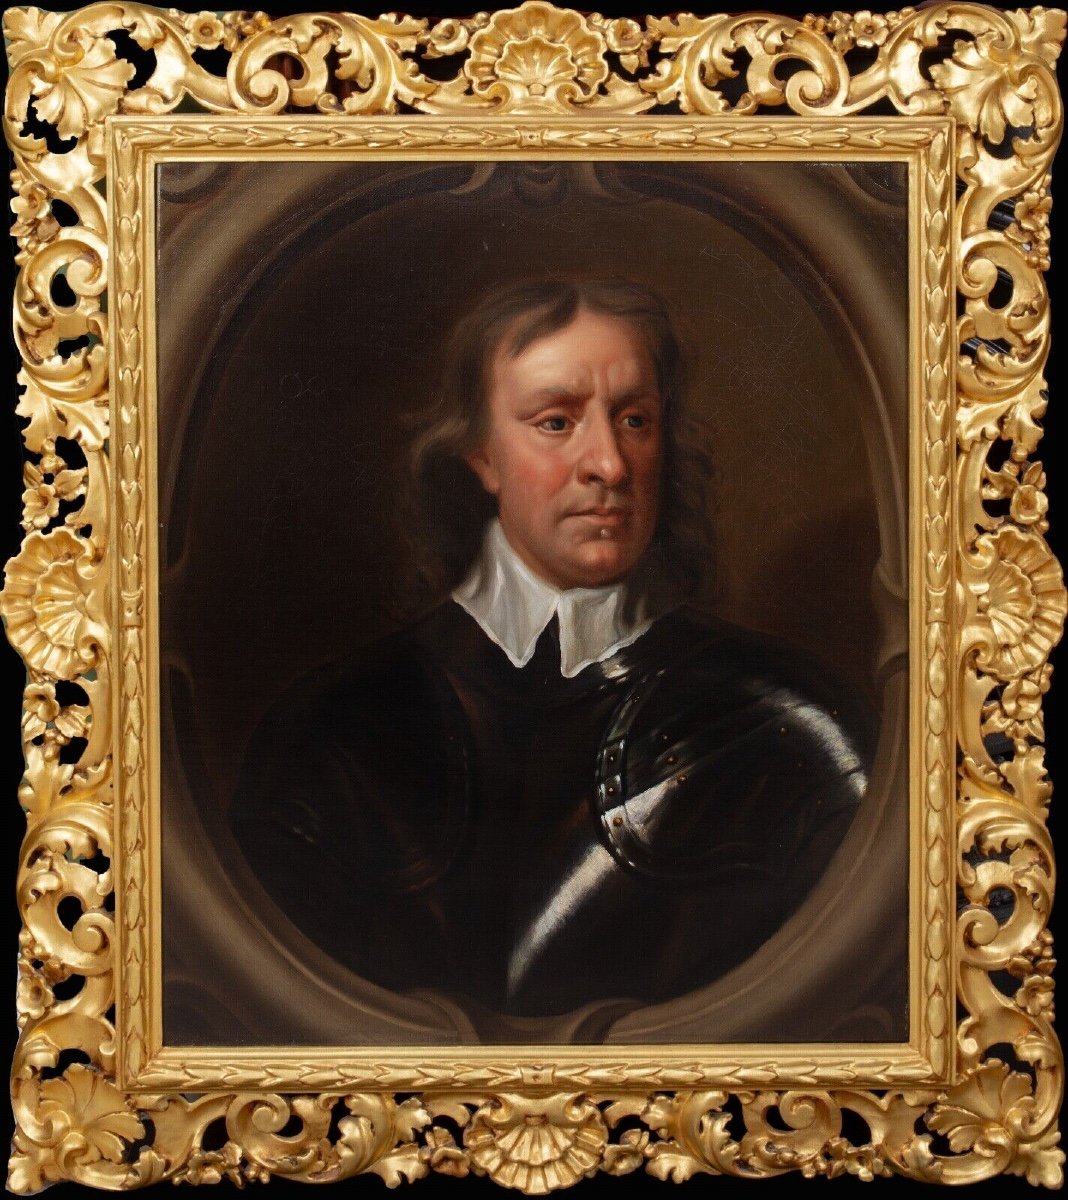 Portrait Of Sir Oliver Cromwell (1599-1658) Sir Peter Lely Circle (1599-1658) Sir Peter Lely